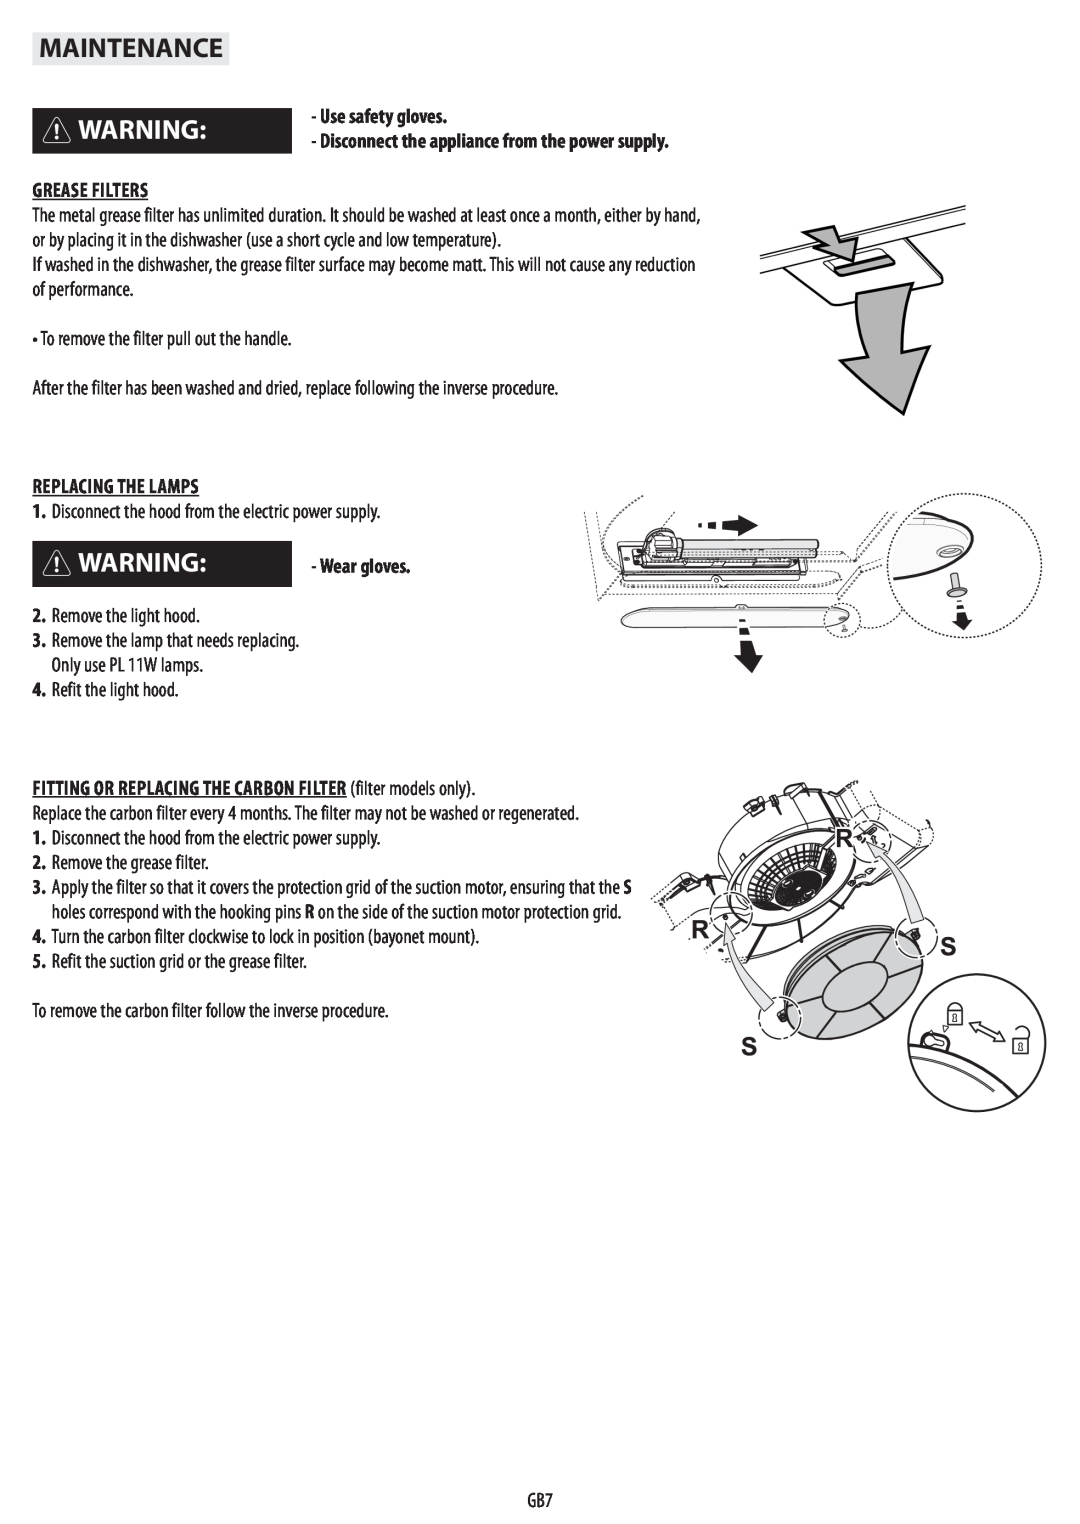 IKEA HW320 manual Maintenance, Use safety gloves Disconnect the appliance from the power supply, Grease Filters 